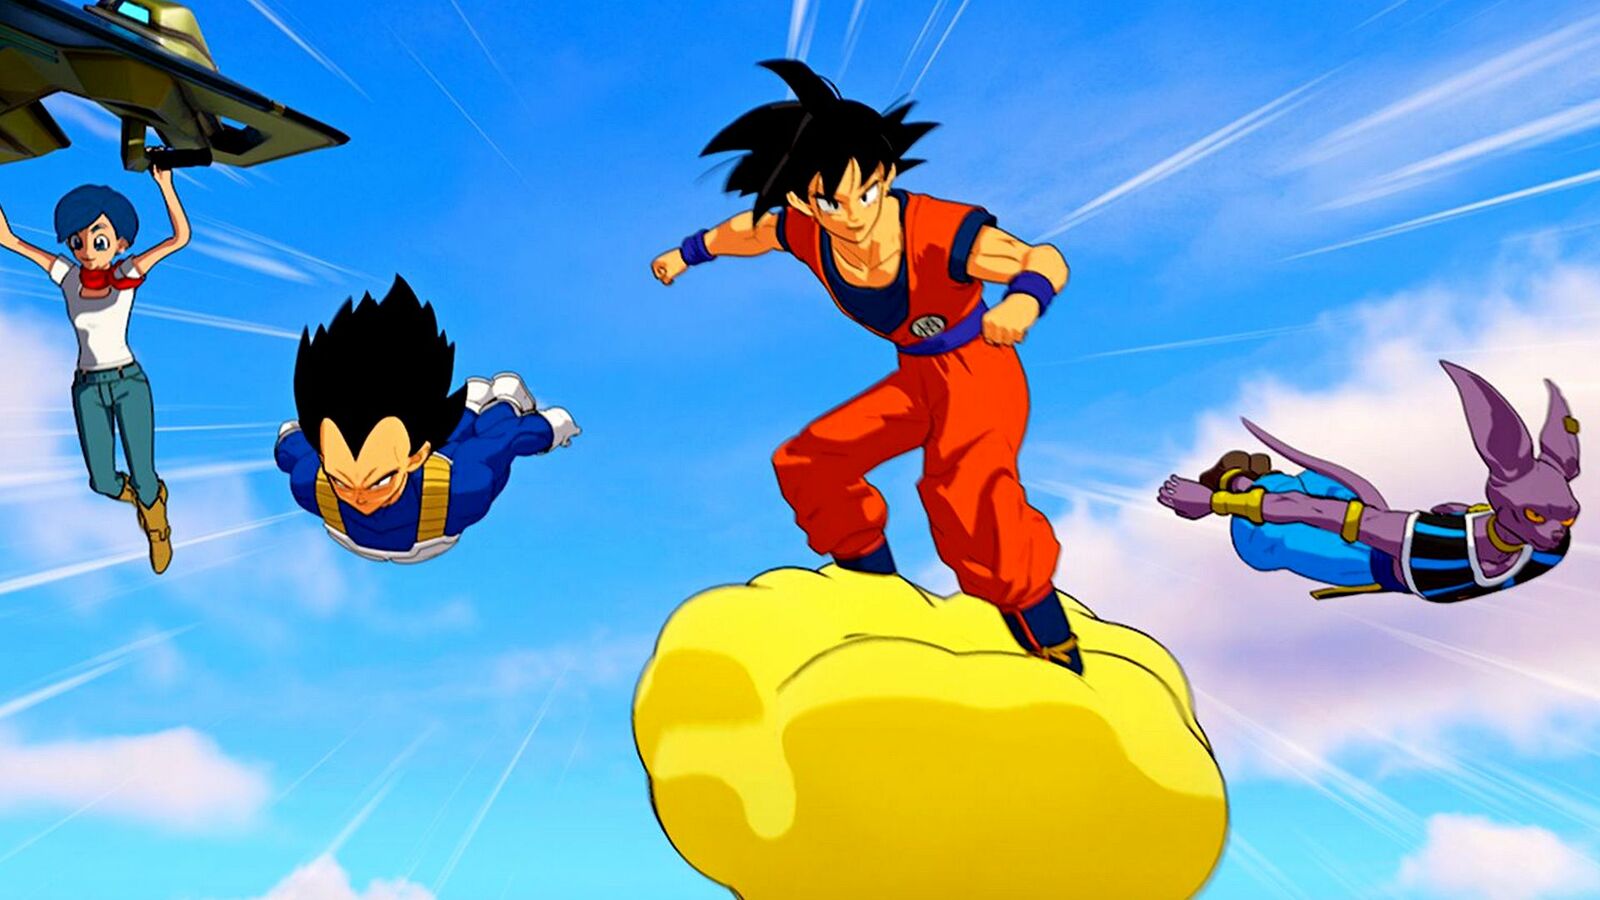 Fortnite: Dragon Ball has arrived in Battle Royale's what awaits you